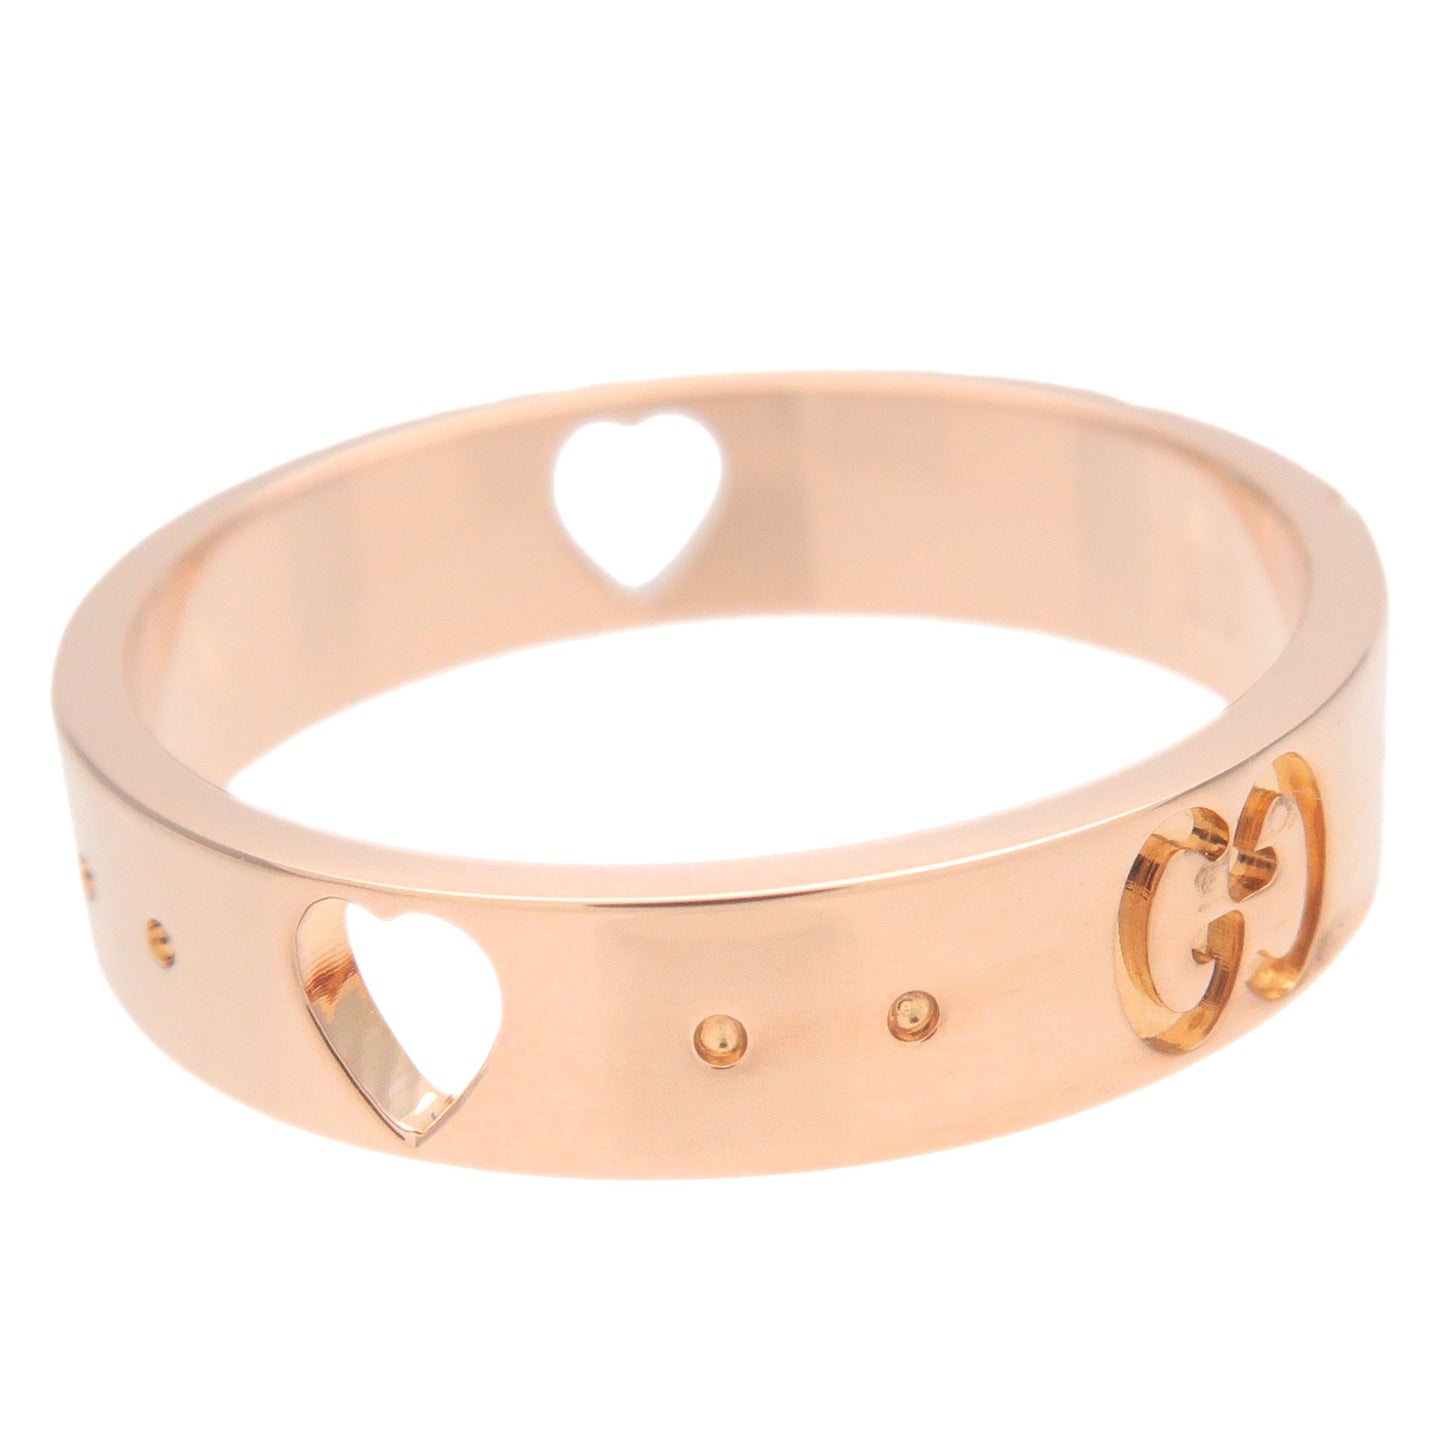 GUCCI Icon Amore Ring K18PG 750PG Rose Gold #10 US5 EU50